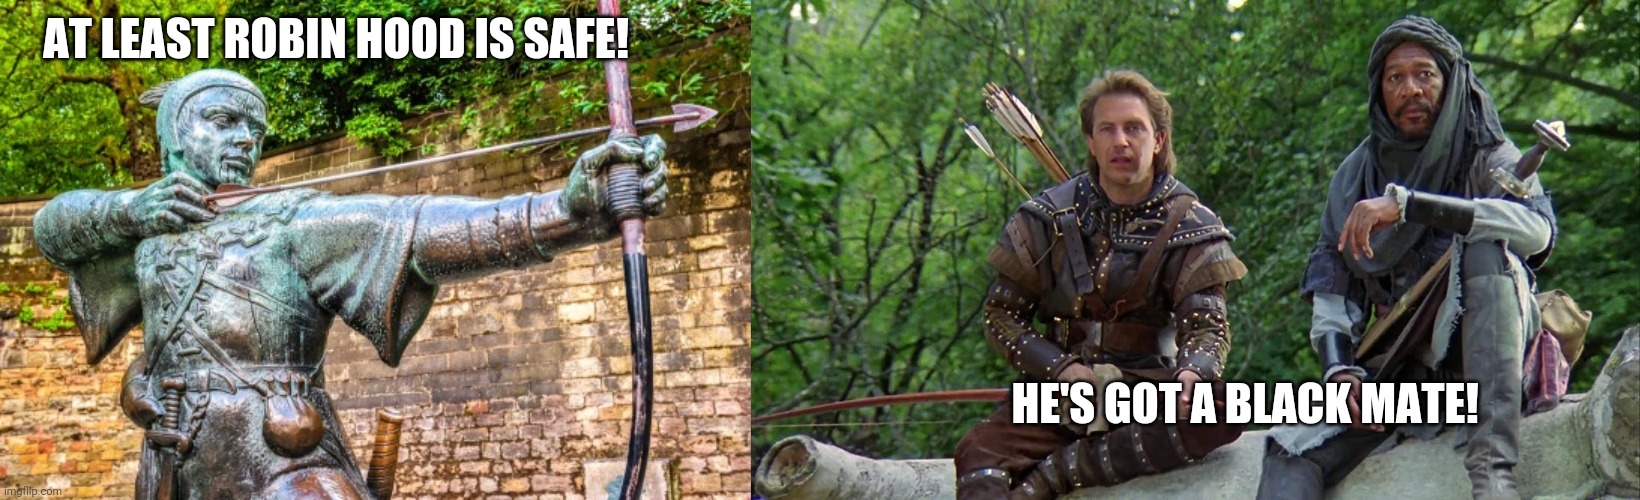 Robin hood's safe | AT LEAST ROBIN HOOD IS SAFE! HE'S GOT A BLACK MATE! | image tagged in racism,racist,statues,blm,statue | made w/ Imgflip meme maker